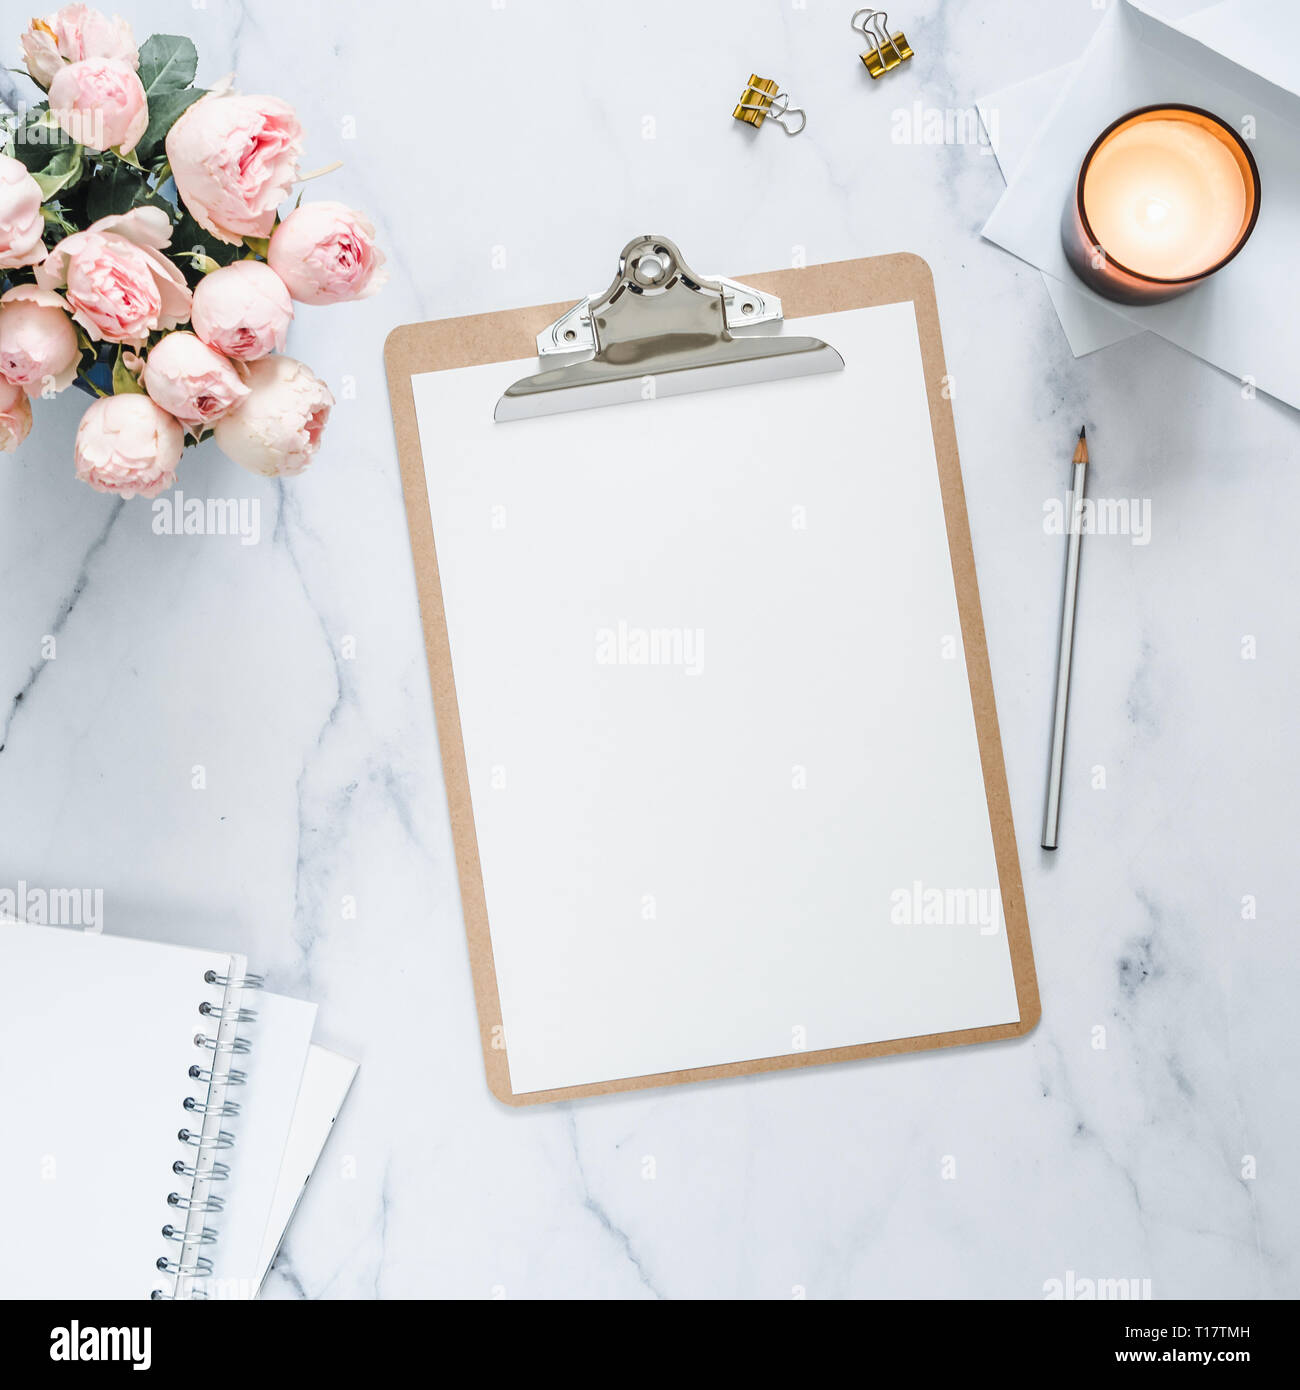 Top view of clipboard with white empty page. Clipboard, flowers, scented candle on white marble. Feminine home office mock up with blank sheet of paper A4 portrait format,copy space for text. Flat lay Stock Photo